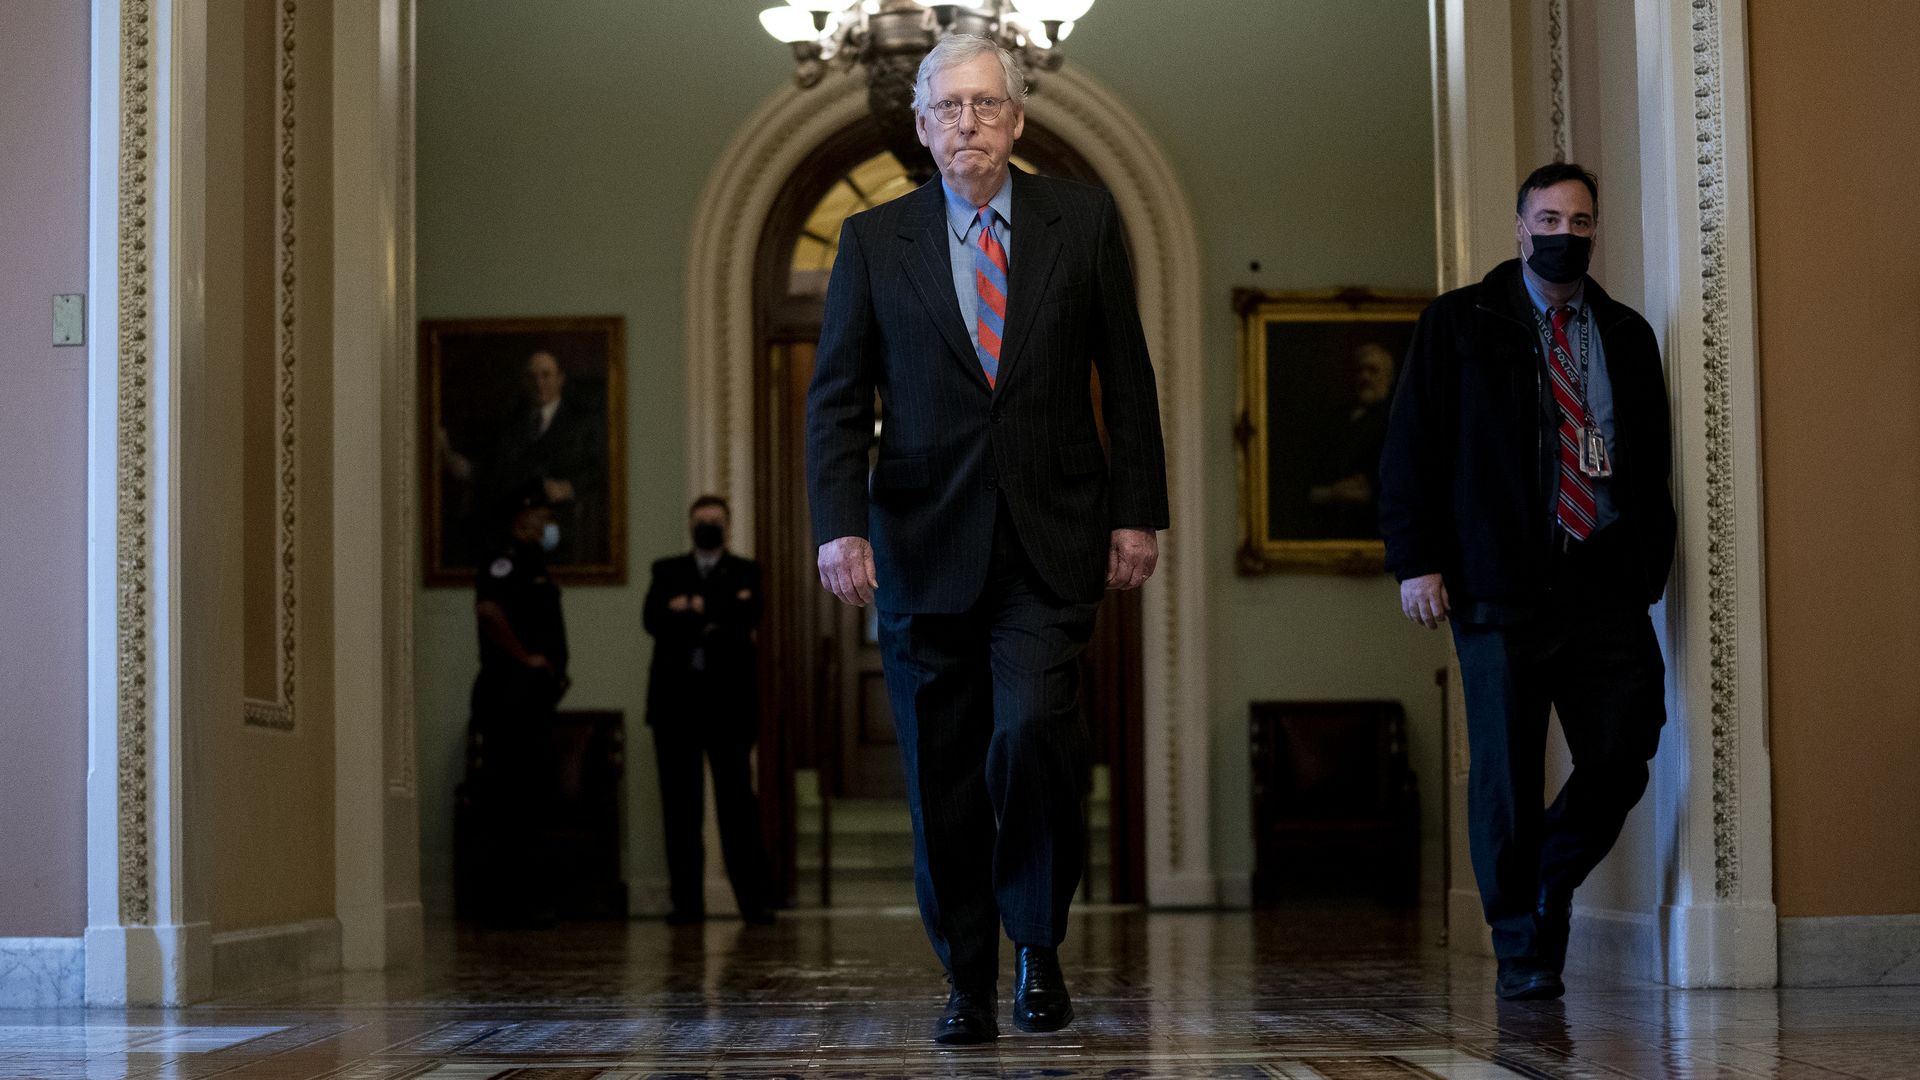 Senate Minority Leader Mitch McConnell is seen walking away from the chamber on Wednesday.